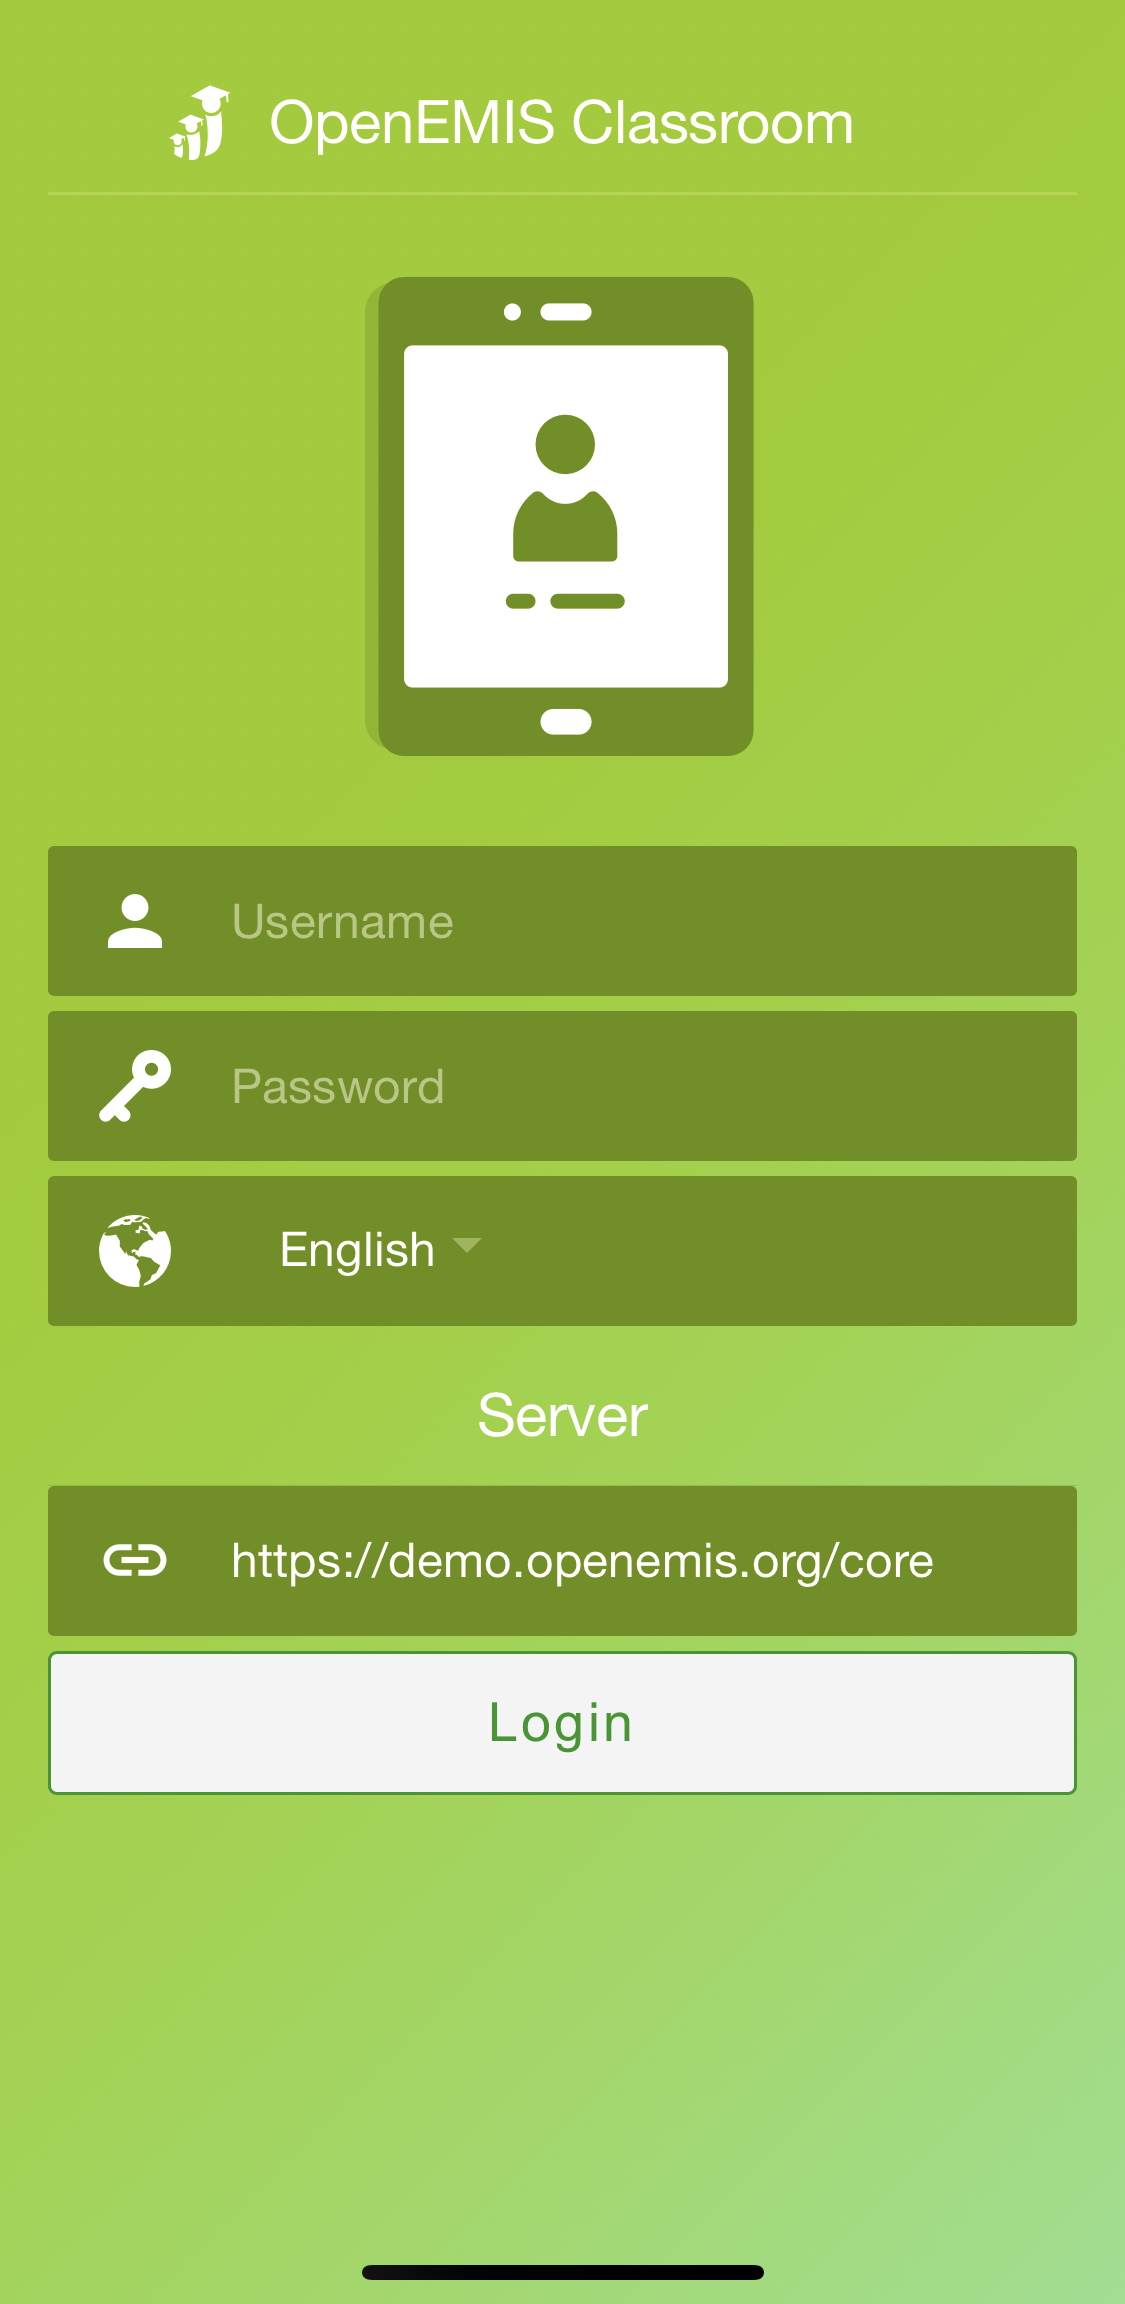 Login into OpenEMIS Classroom and access Class Information